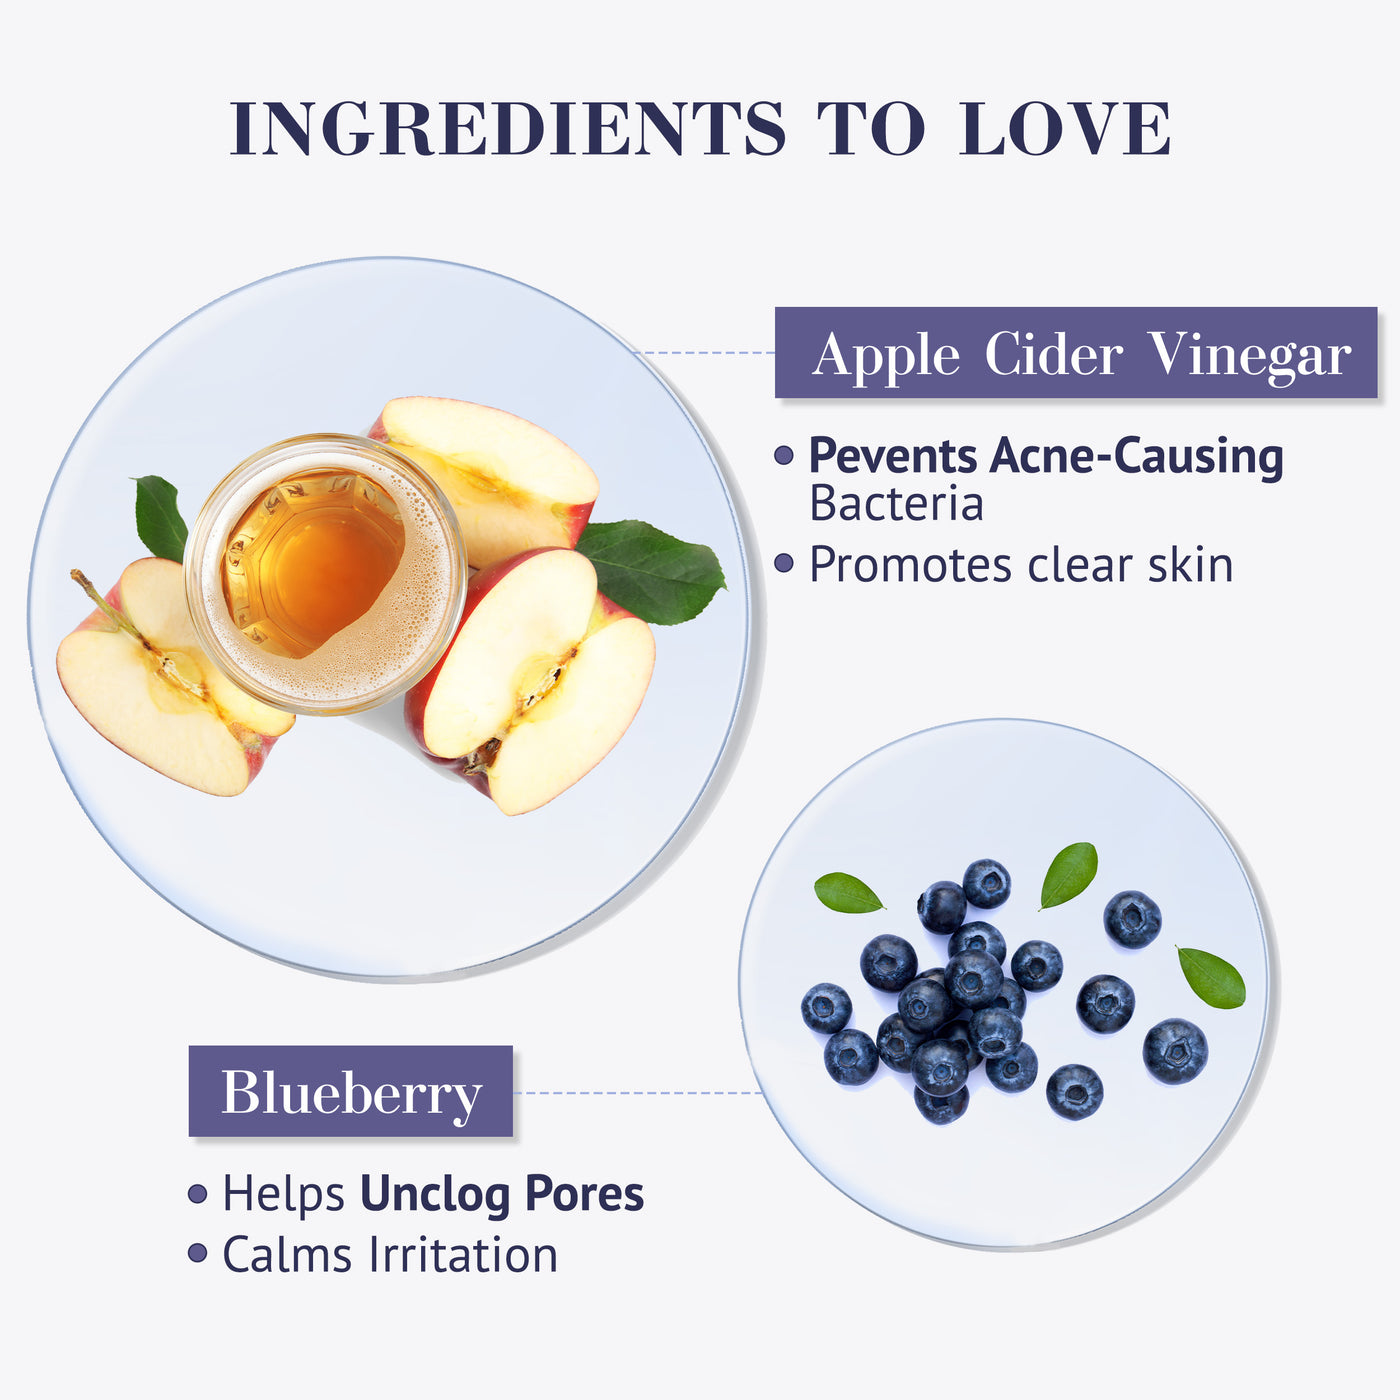 Apple Cider Vinegar & Blueberry Acne Control Face Serum | Forever Collection | (30 ml)